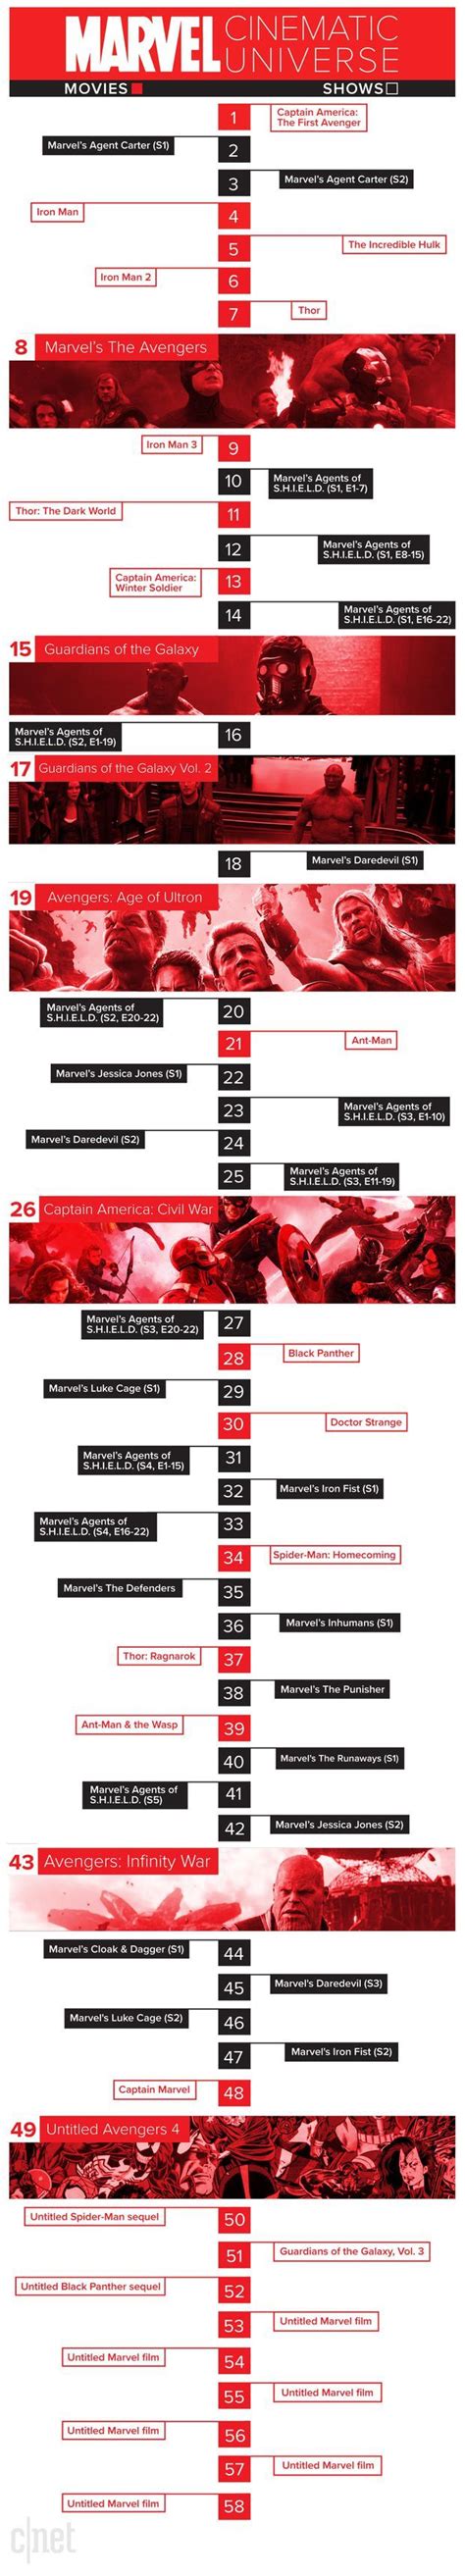 How to watch the entire marvel cinematic universe in order of release. Marvel timeline: How to watch every Marvel movie and show ...